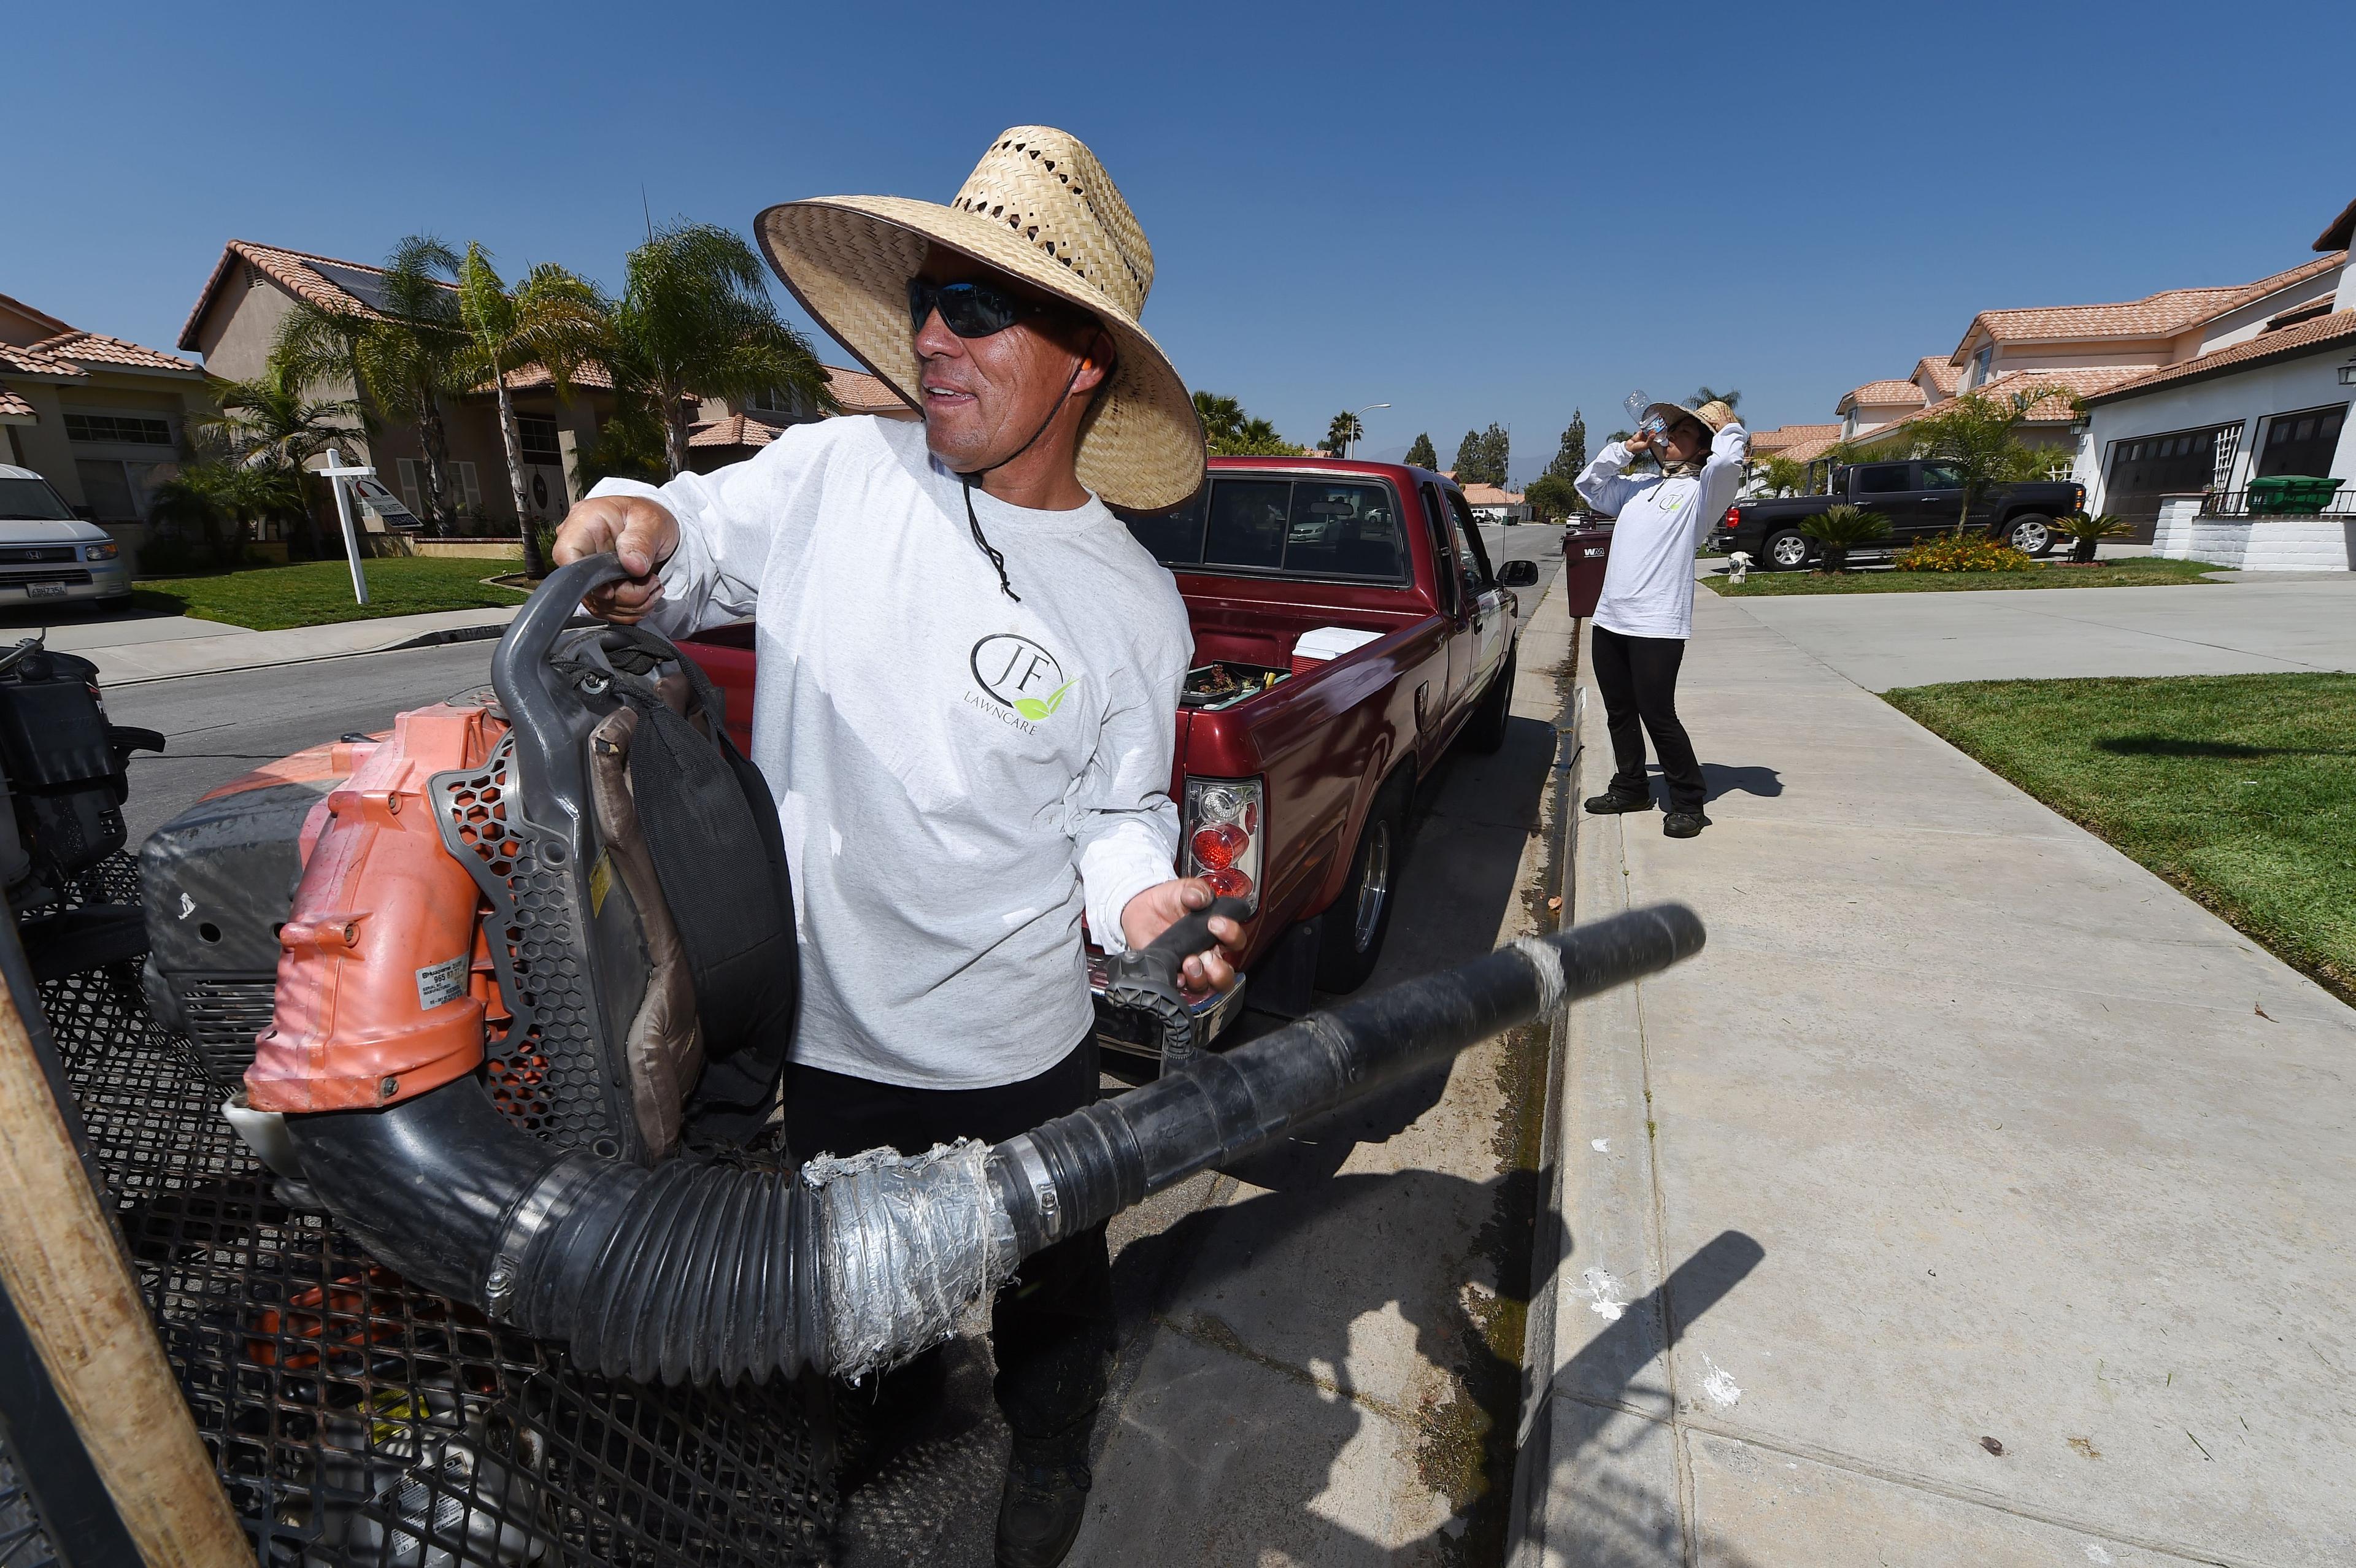 California’s Ban on Sale of Gas-Powered Lawnmowers, Leaf Blowers Off to Slow Start